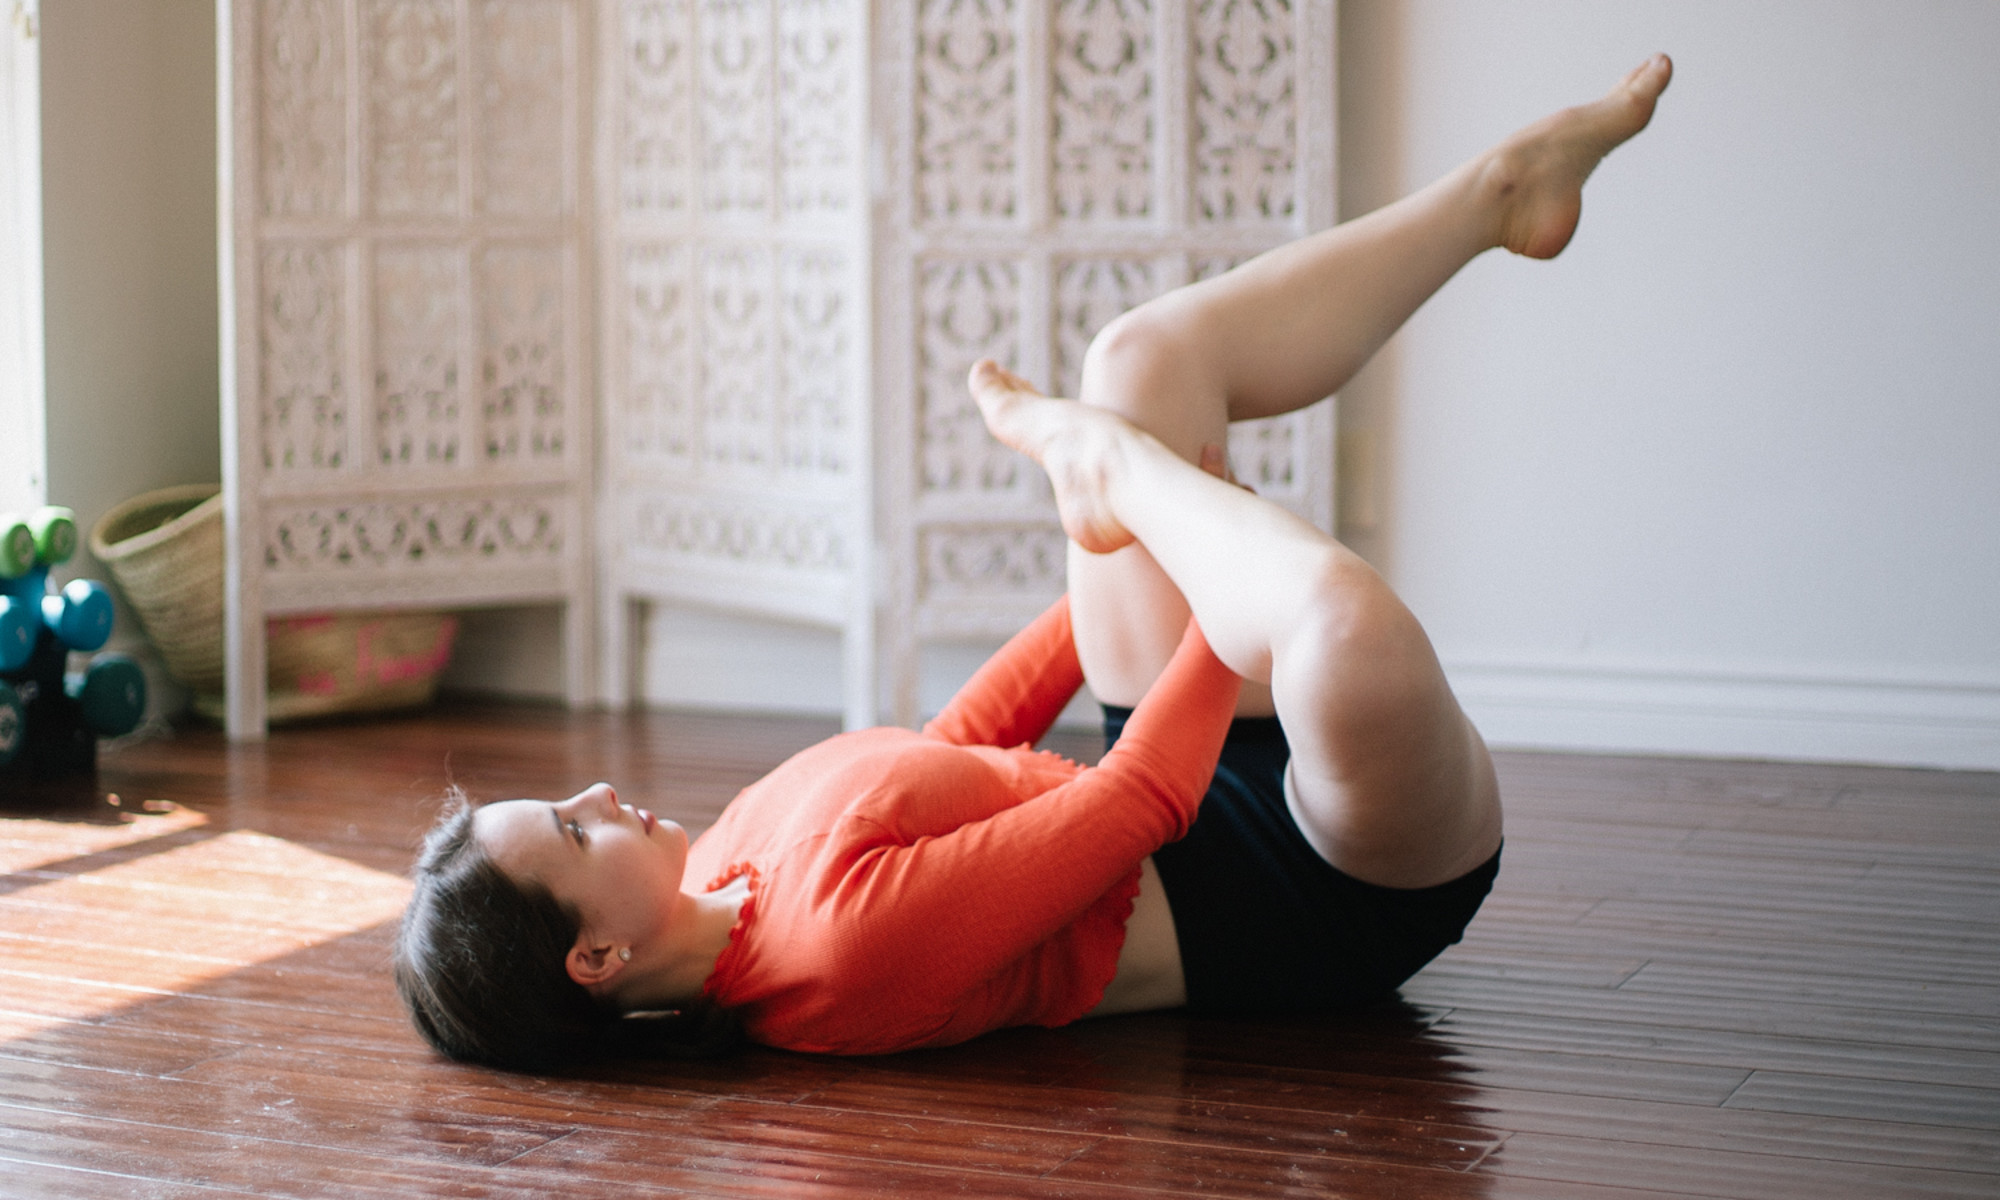 14 Hip-Opening Stretches & Why The Hips Store Trauma